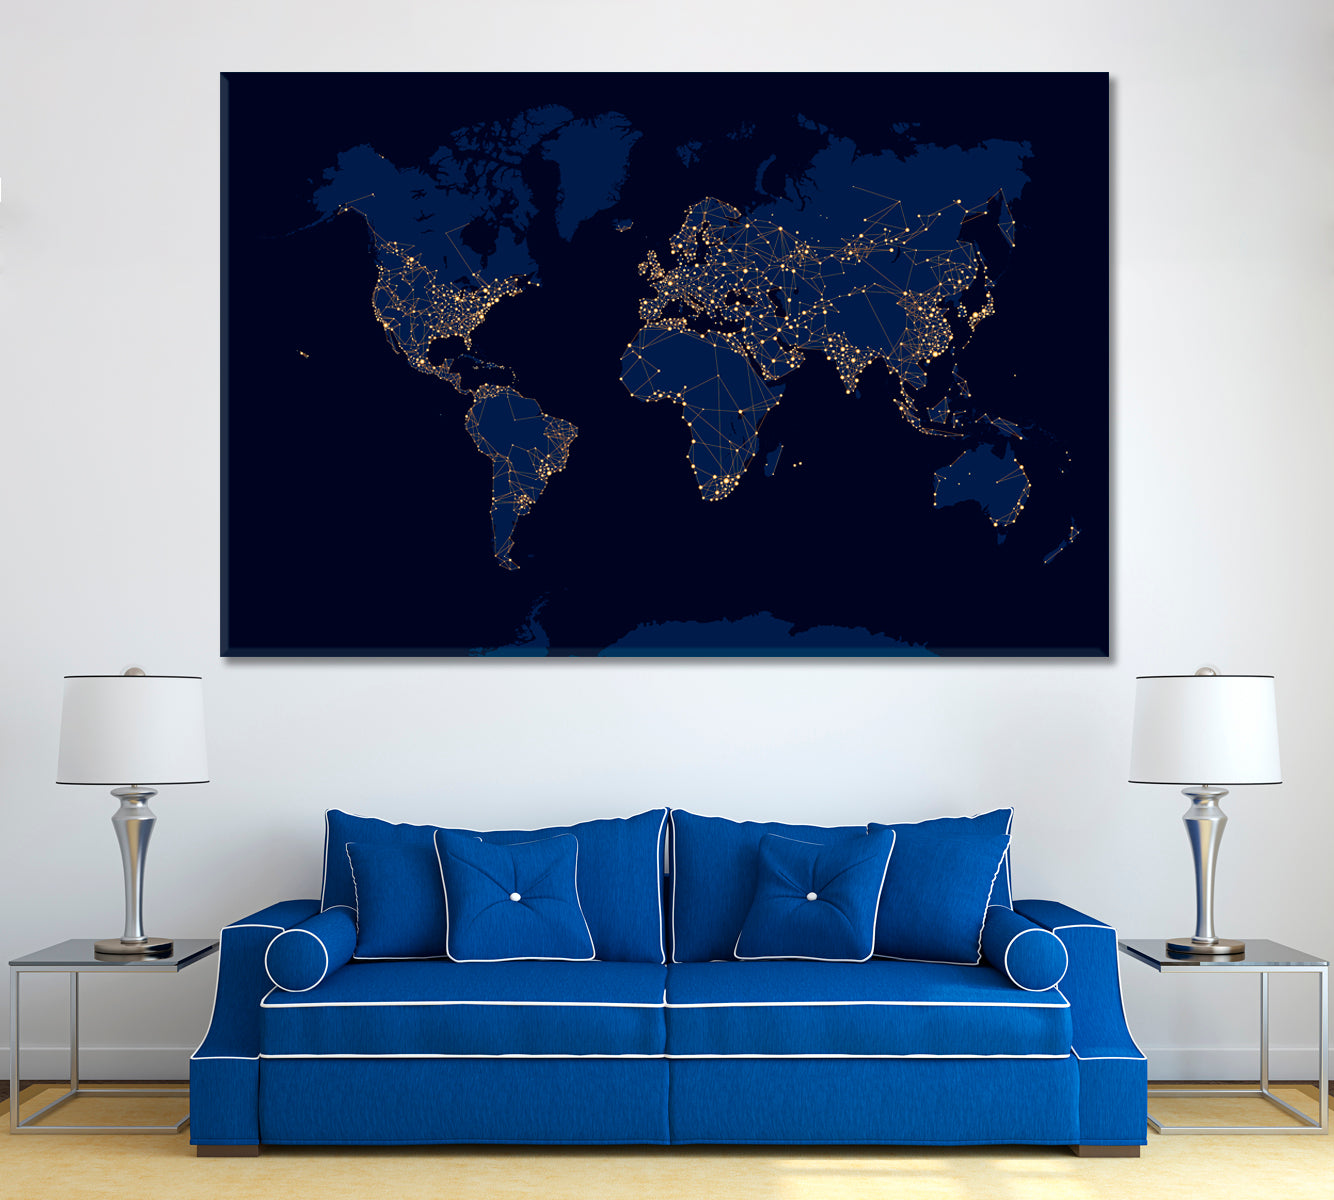 Abstract Night World Map Canvas Print ArtLexy 1 Panel 24"x16" inches 